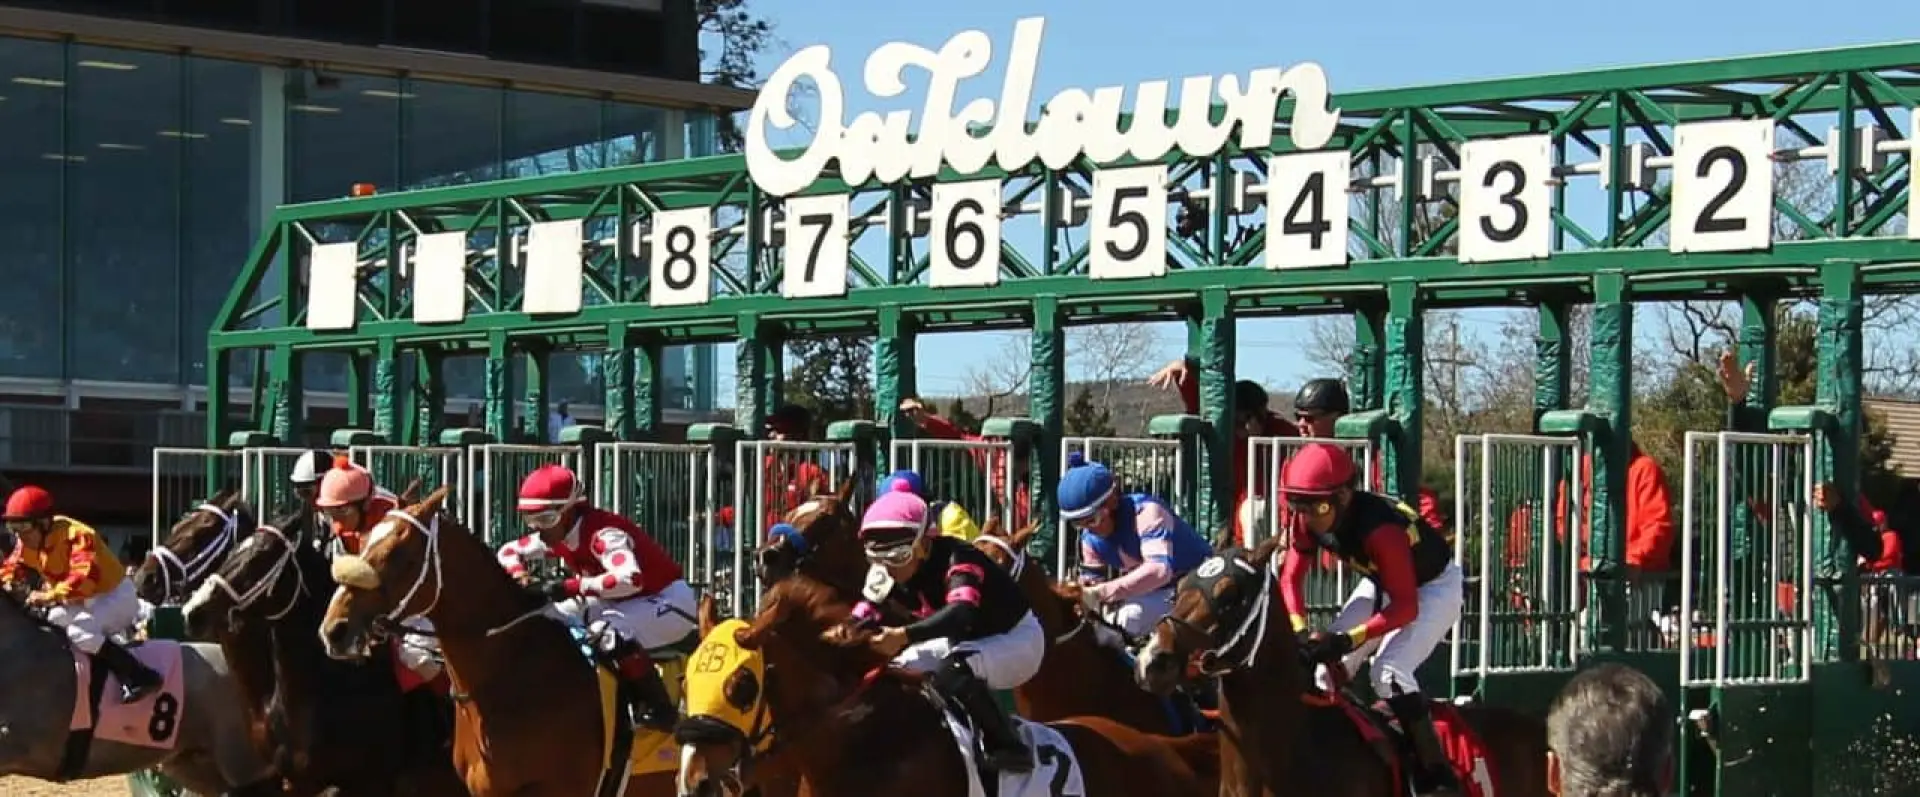 Oaklawn Park - US Horse Racing